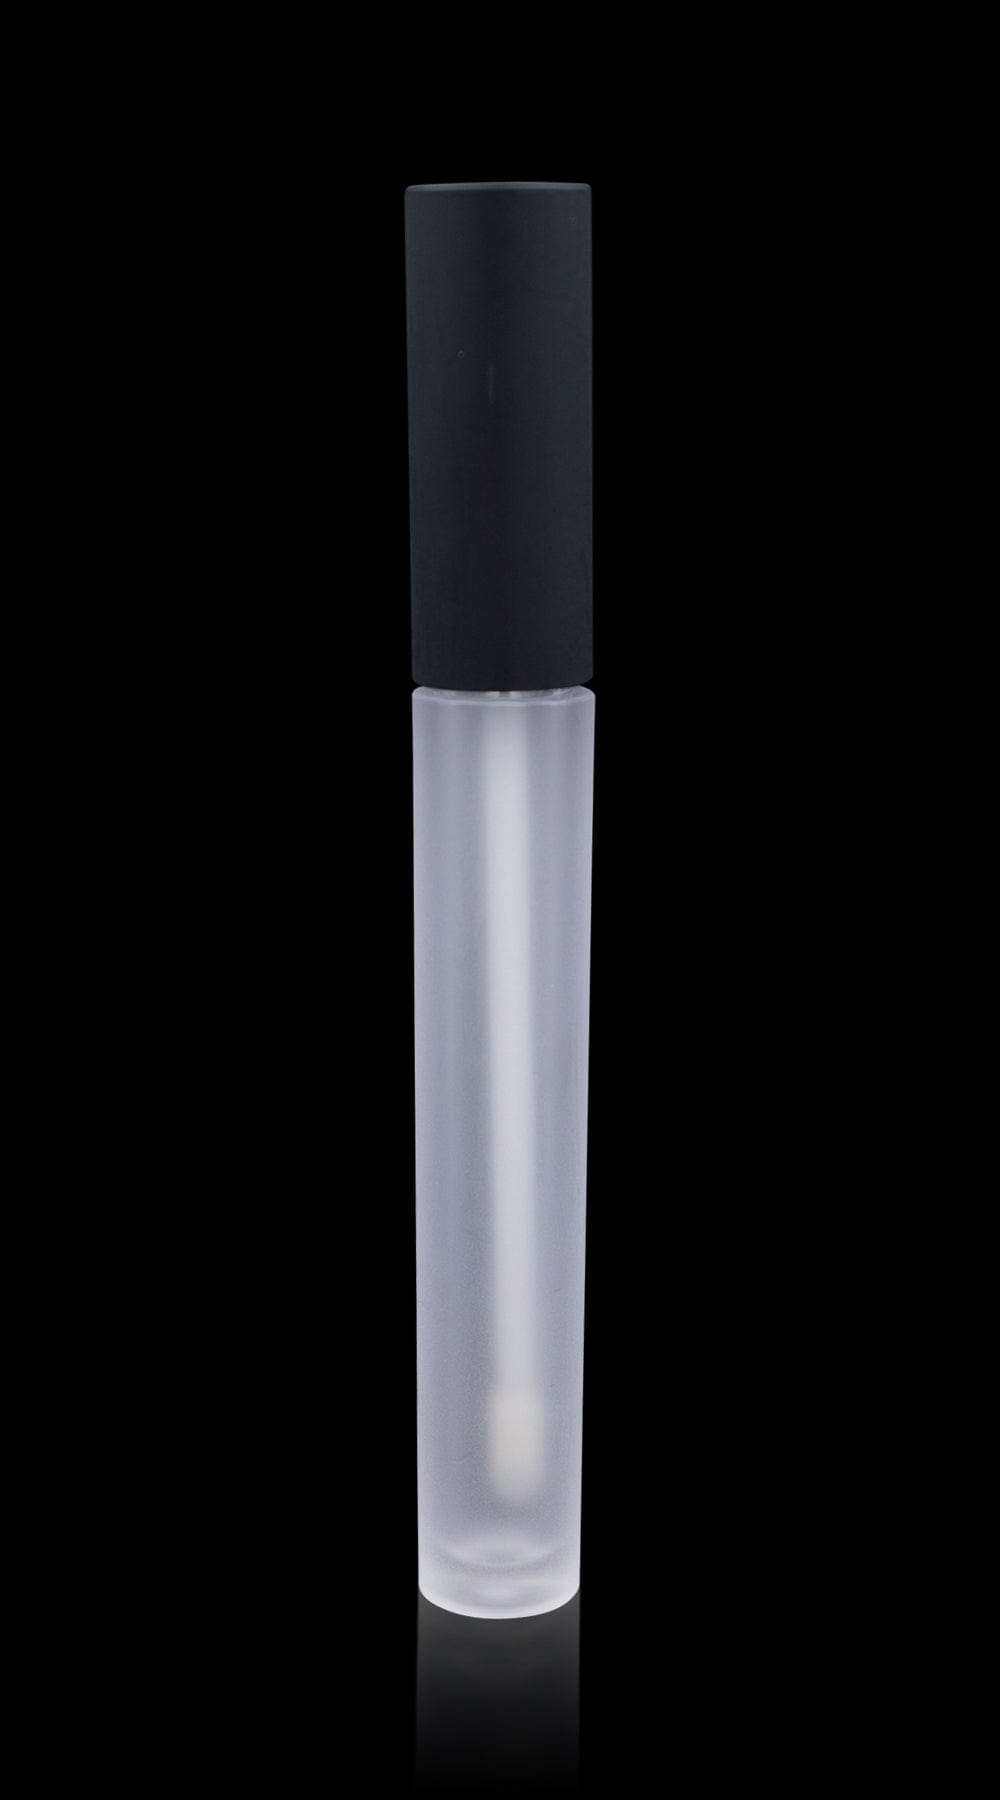 Vibe Lip Gloss Container Matte Black Cap with Frosted Bottle - Cosmetic Packaging Now